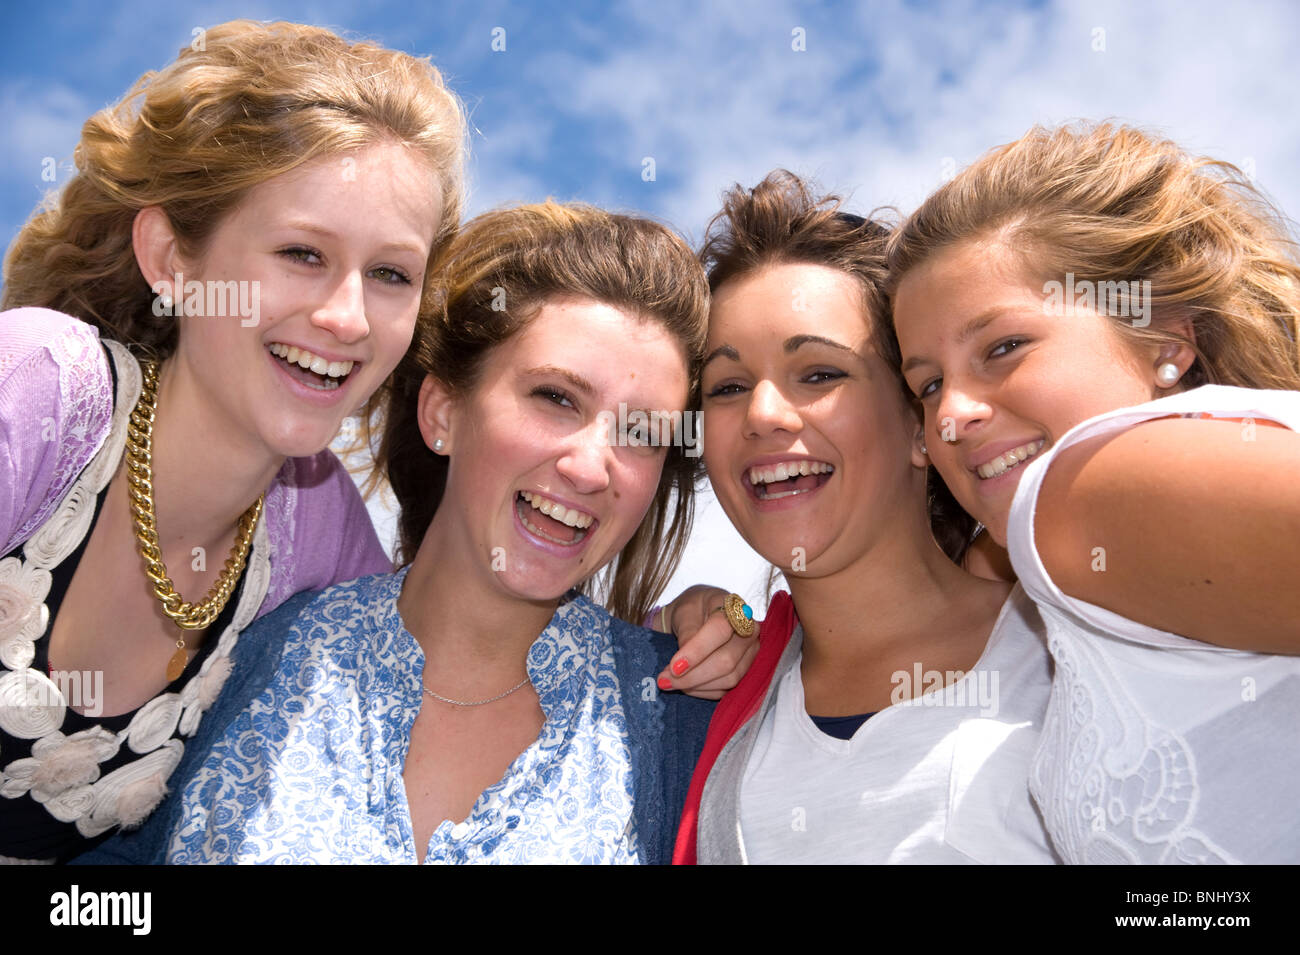 15 16 4 girl teenager in general normally scenery day four friends amusingly happily heads heads puddles outdoors outside park Stock Photo